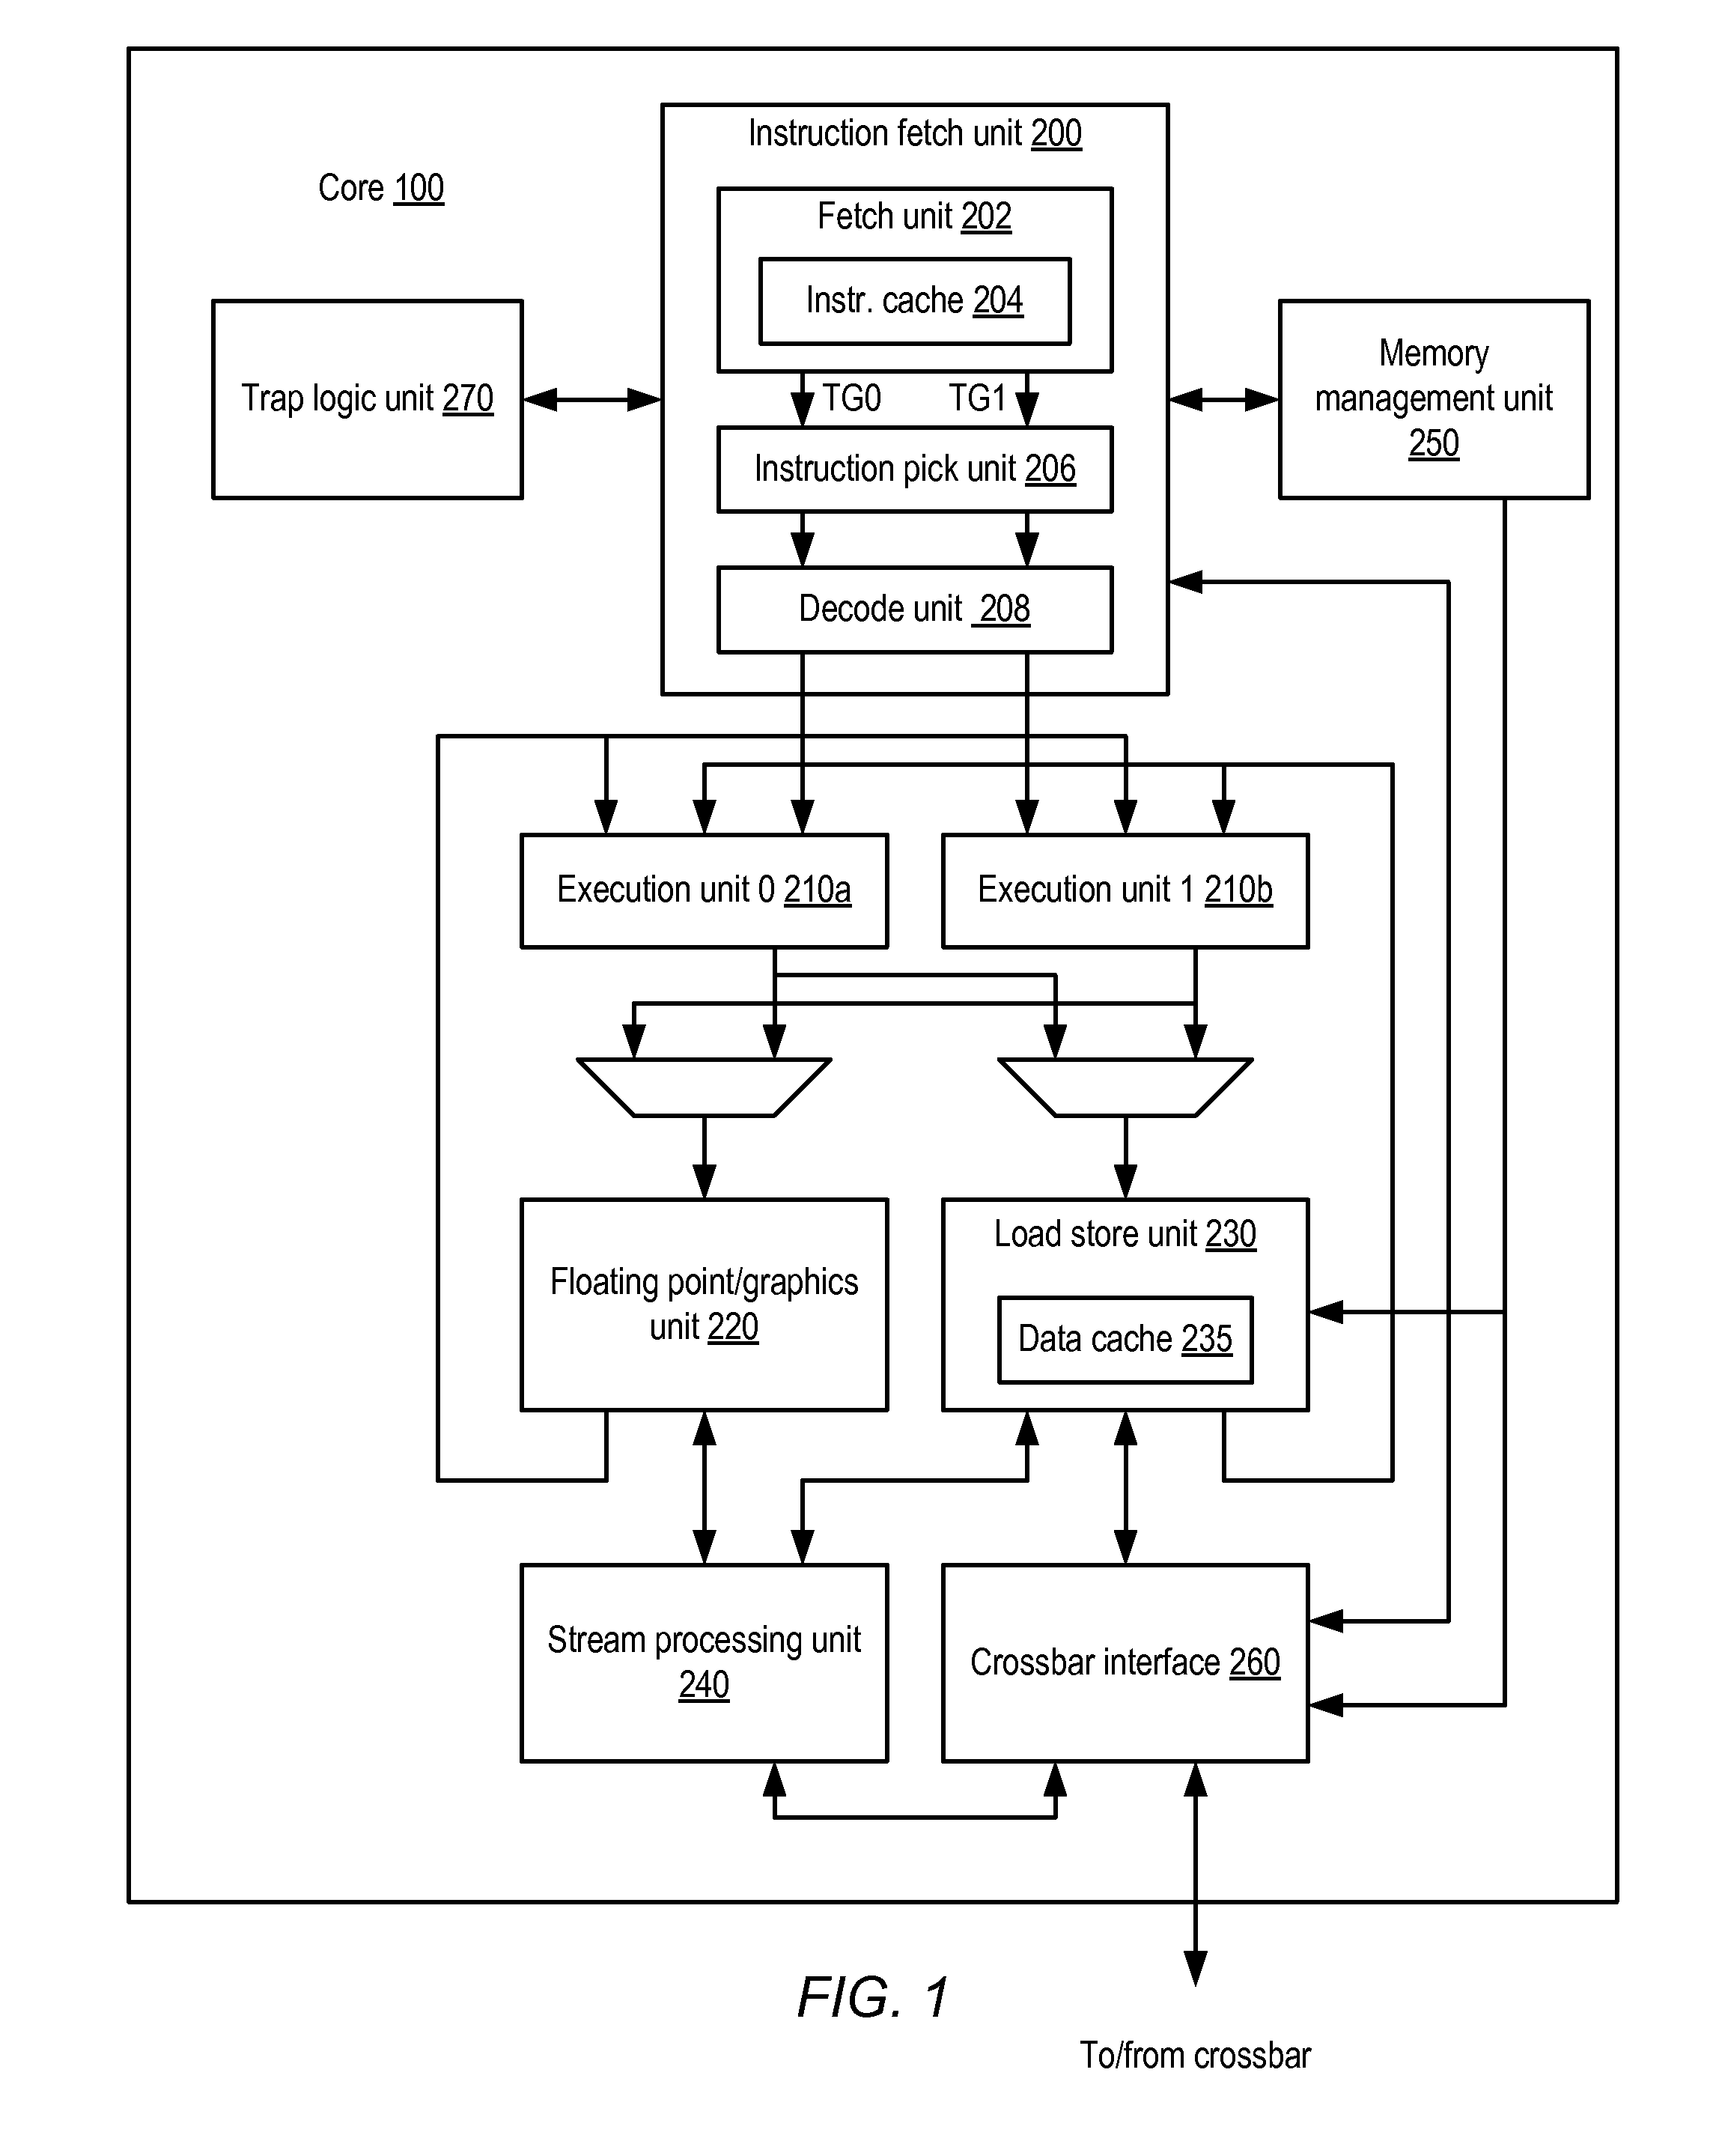 Reducing implementation costs of communicating cache invalidation information in a multicore processor